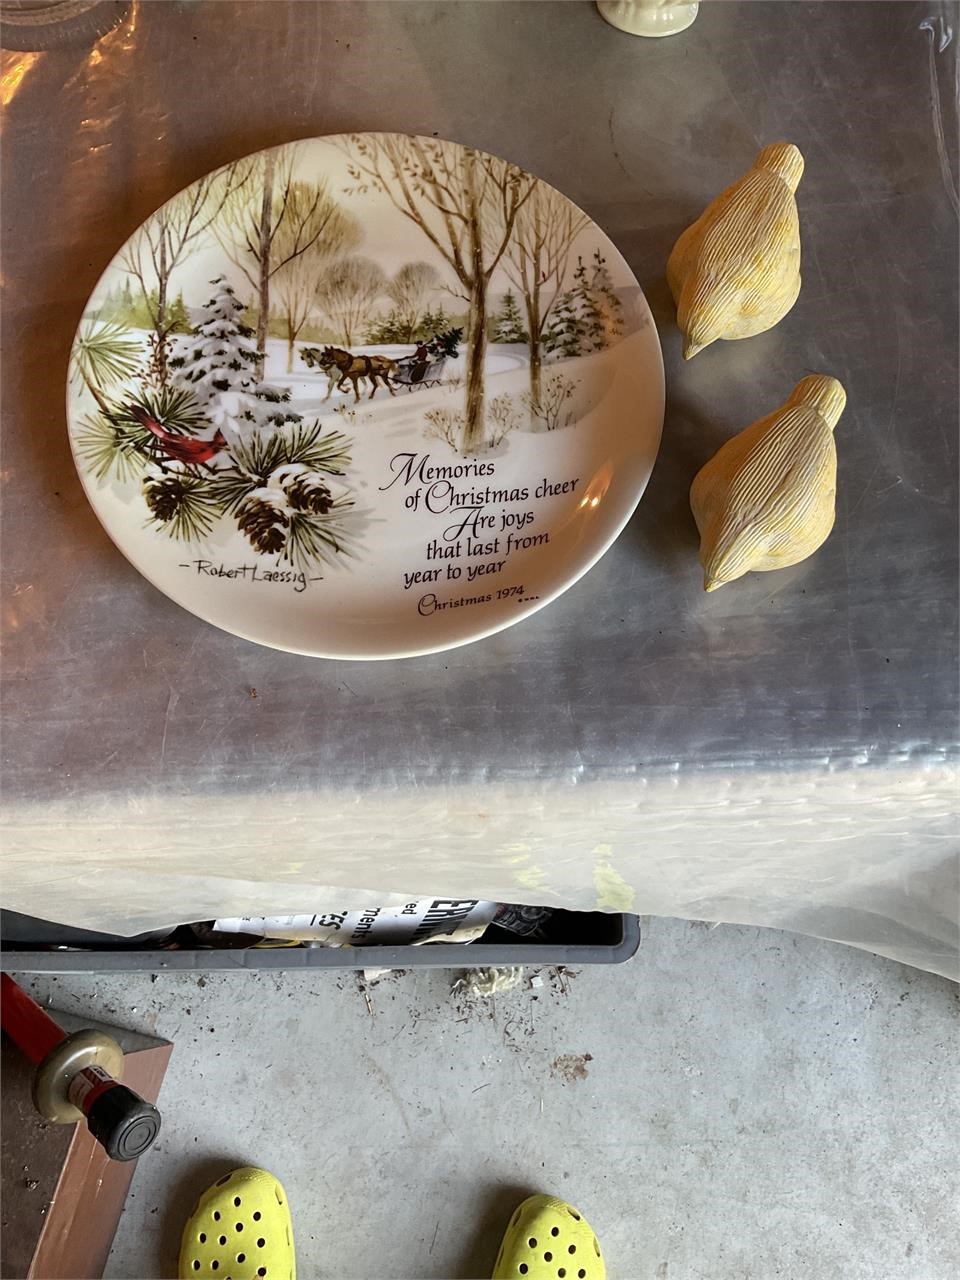 Decorative plate and birds